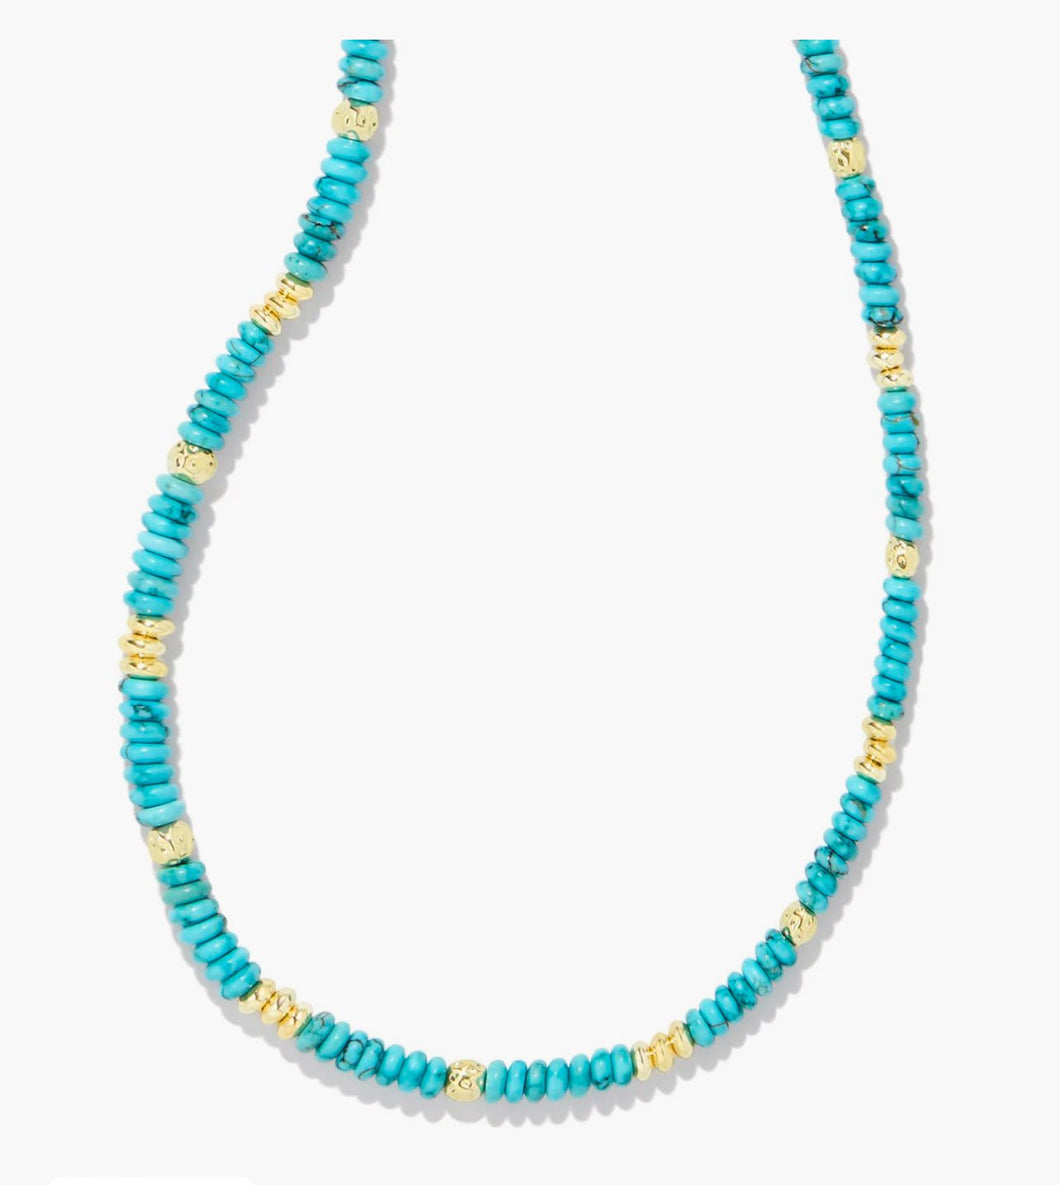 Kendra Scott-Deliah Gold Strand Necklace in Variegated Turquoise Magnesite
9608864612